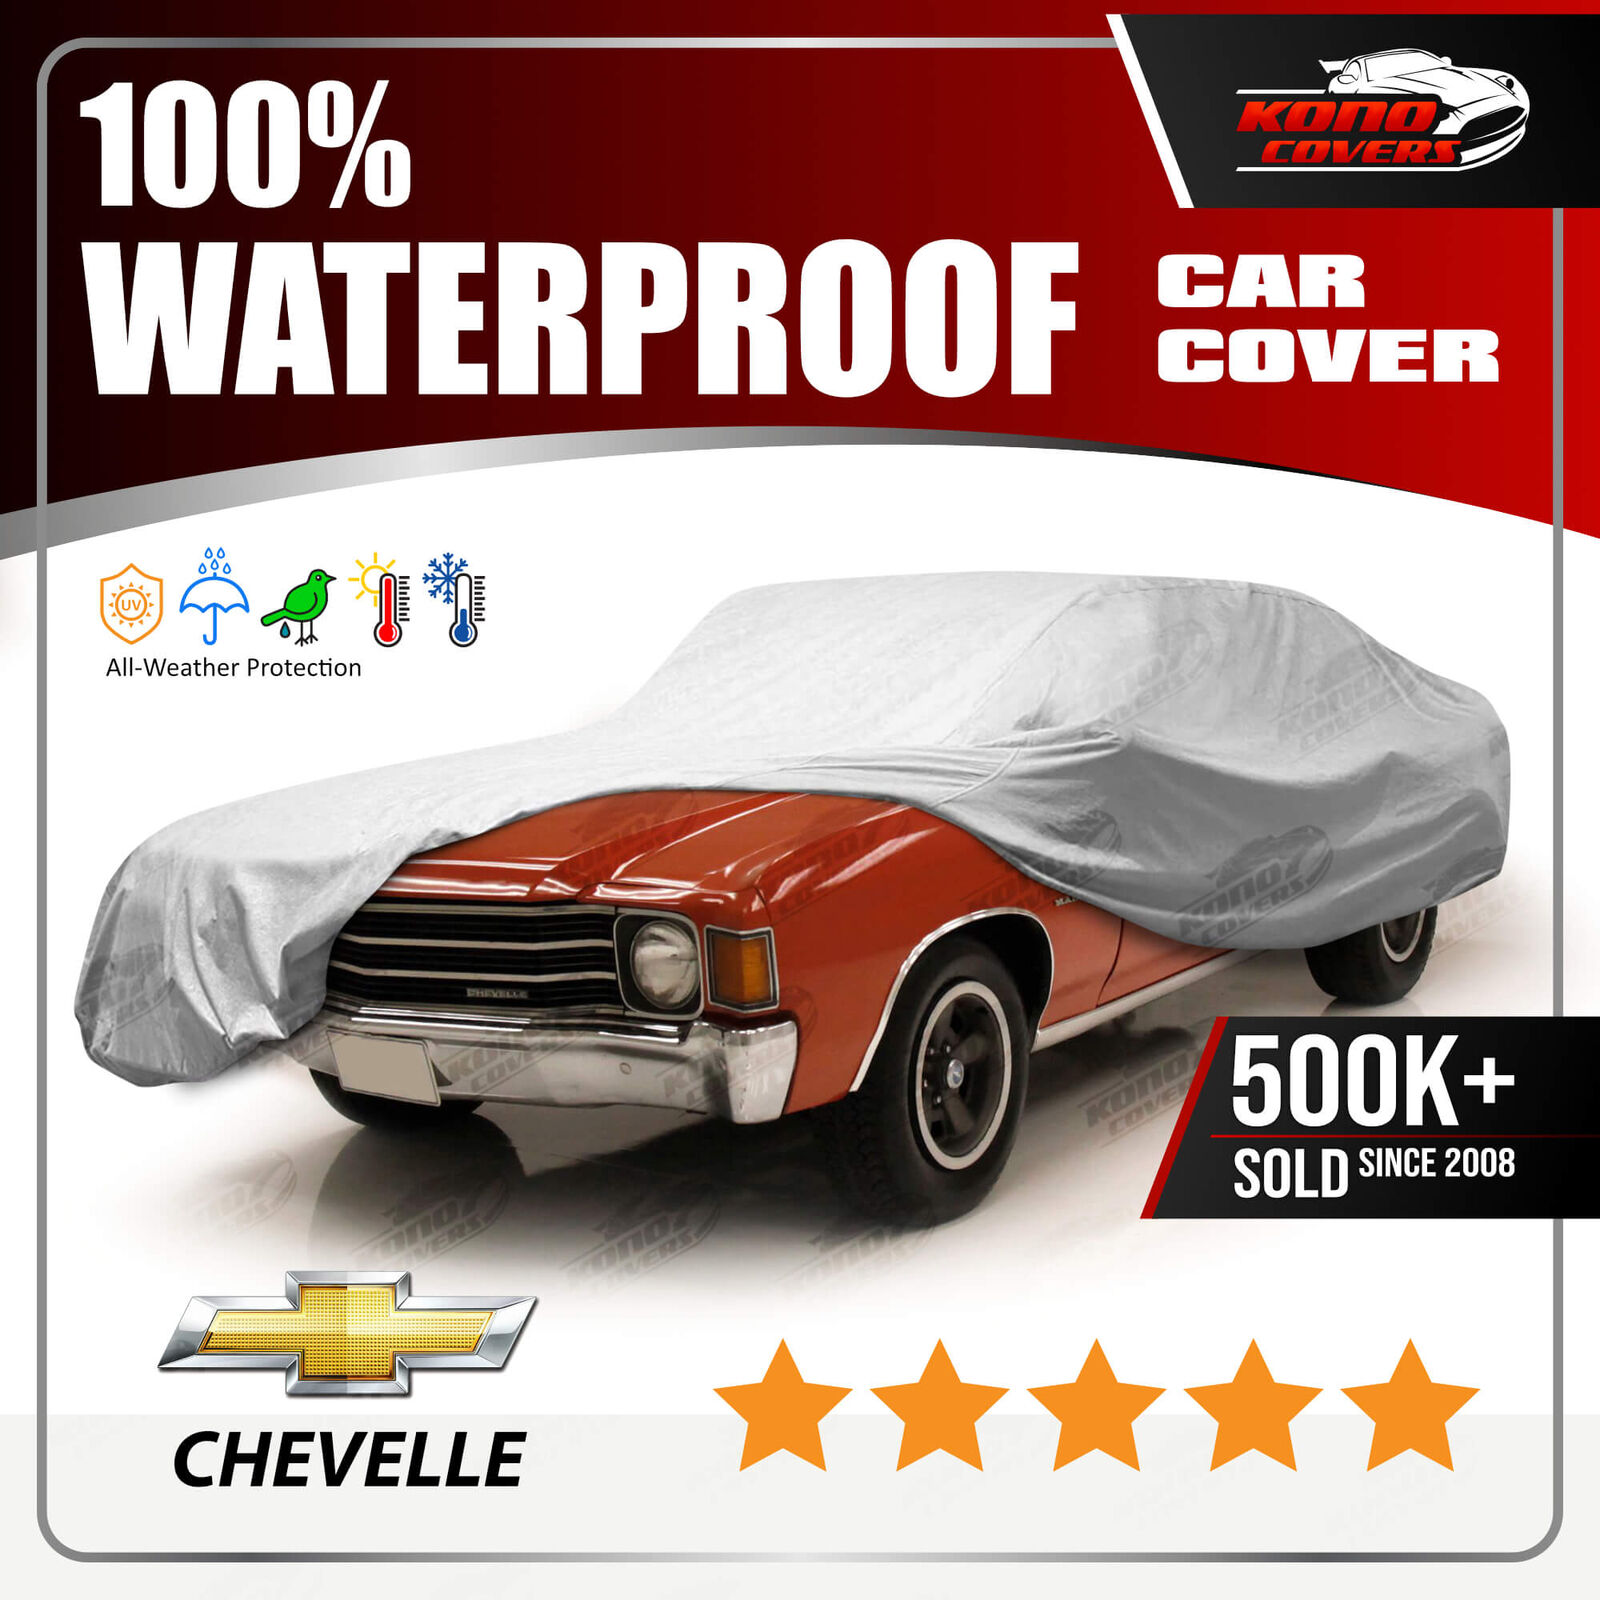 CHEVY CHEVELLE 2-Door 1968-1972 CAR COVER - 100% Waterproof 100% Breathable